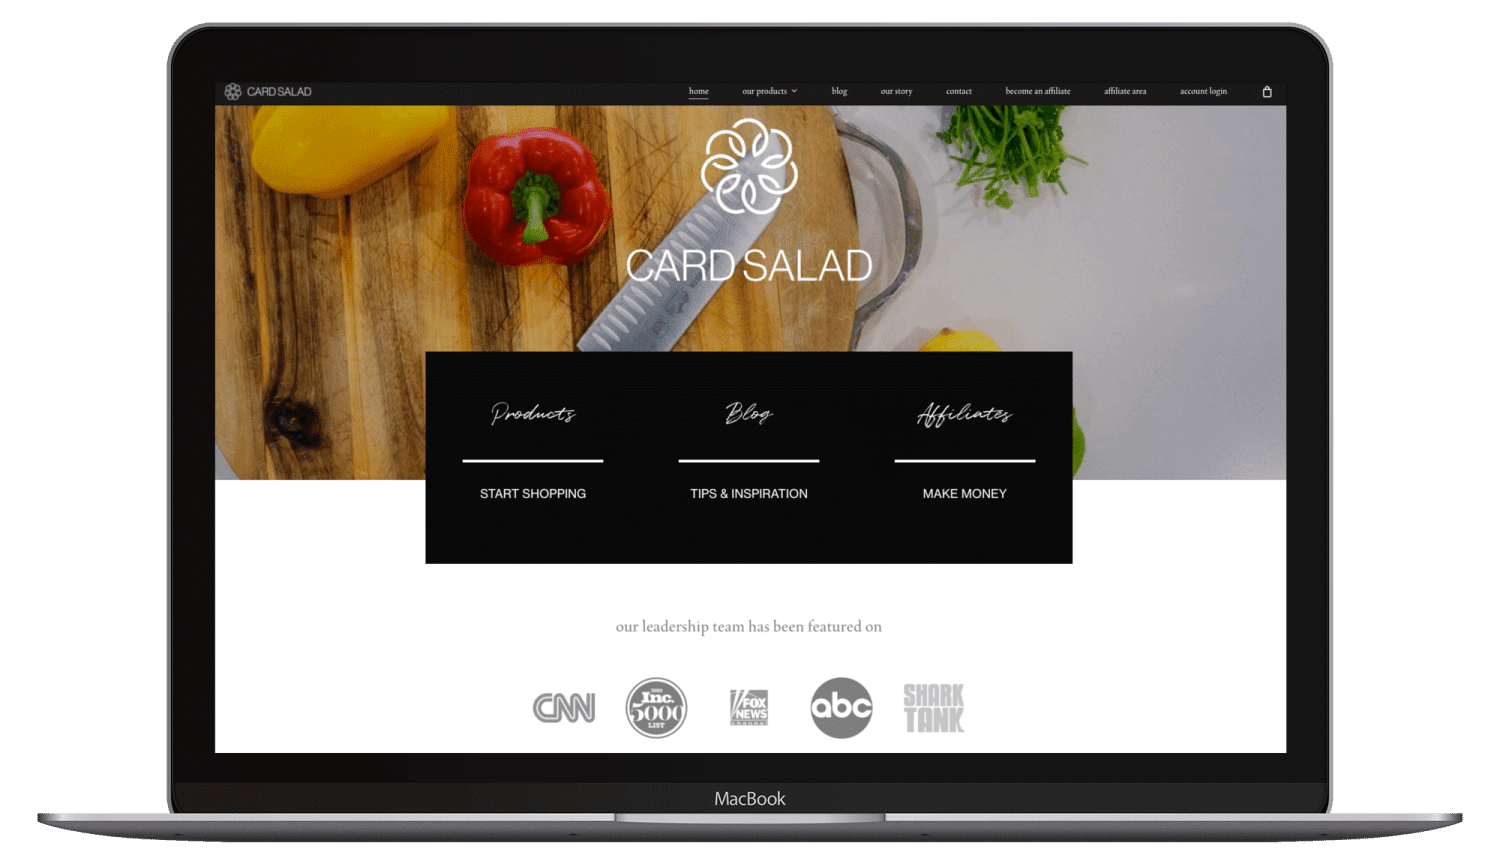 Card salad landing web page laptop mockup wordpress design and support - Big Red Jelly web design firm